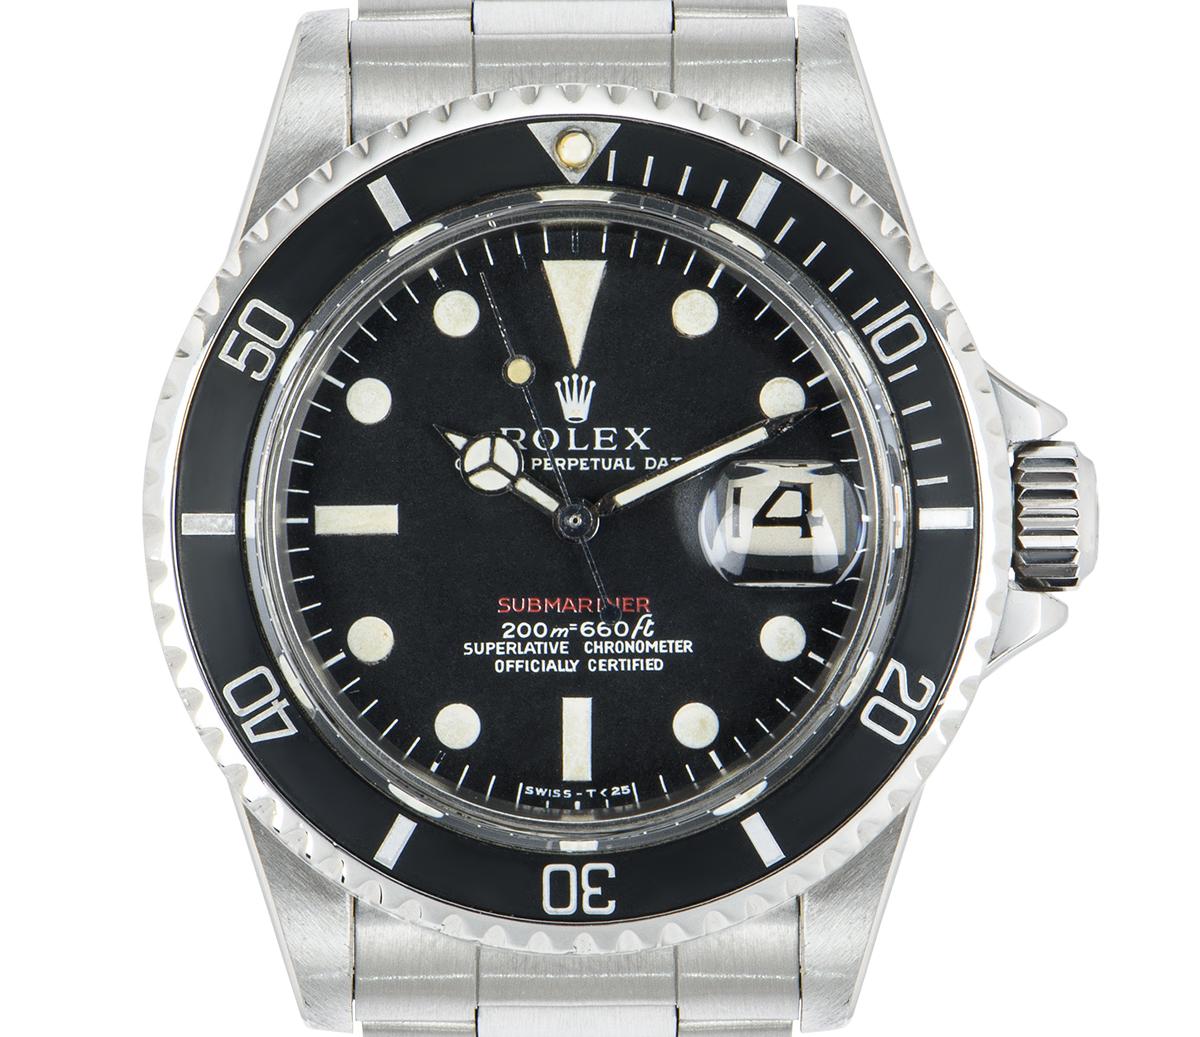 A 40 mm rare vintage Submariner Date in stainless steel by Rolex. The 1680 was the third Submariner produced by Rolex. Featuring a matte black Mark I dial distinguished by the 200m coming before the 660 ft which has closed 6's. The black